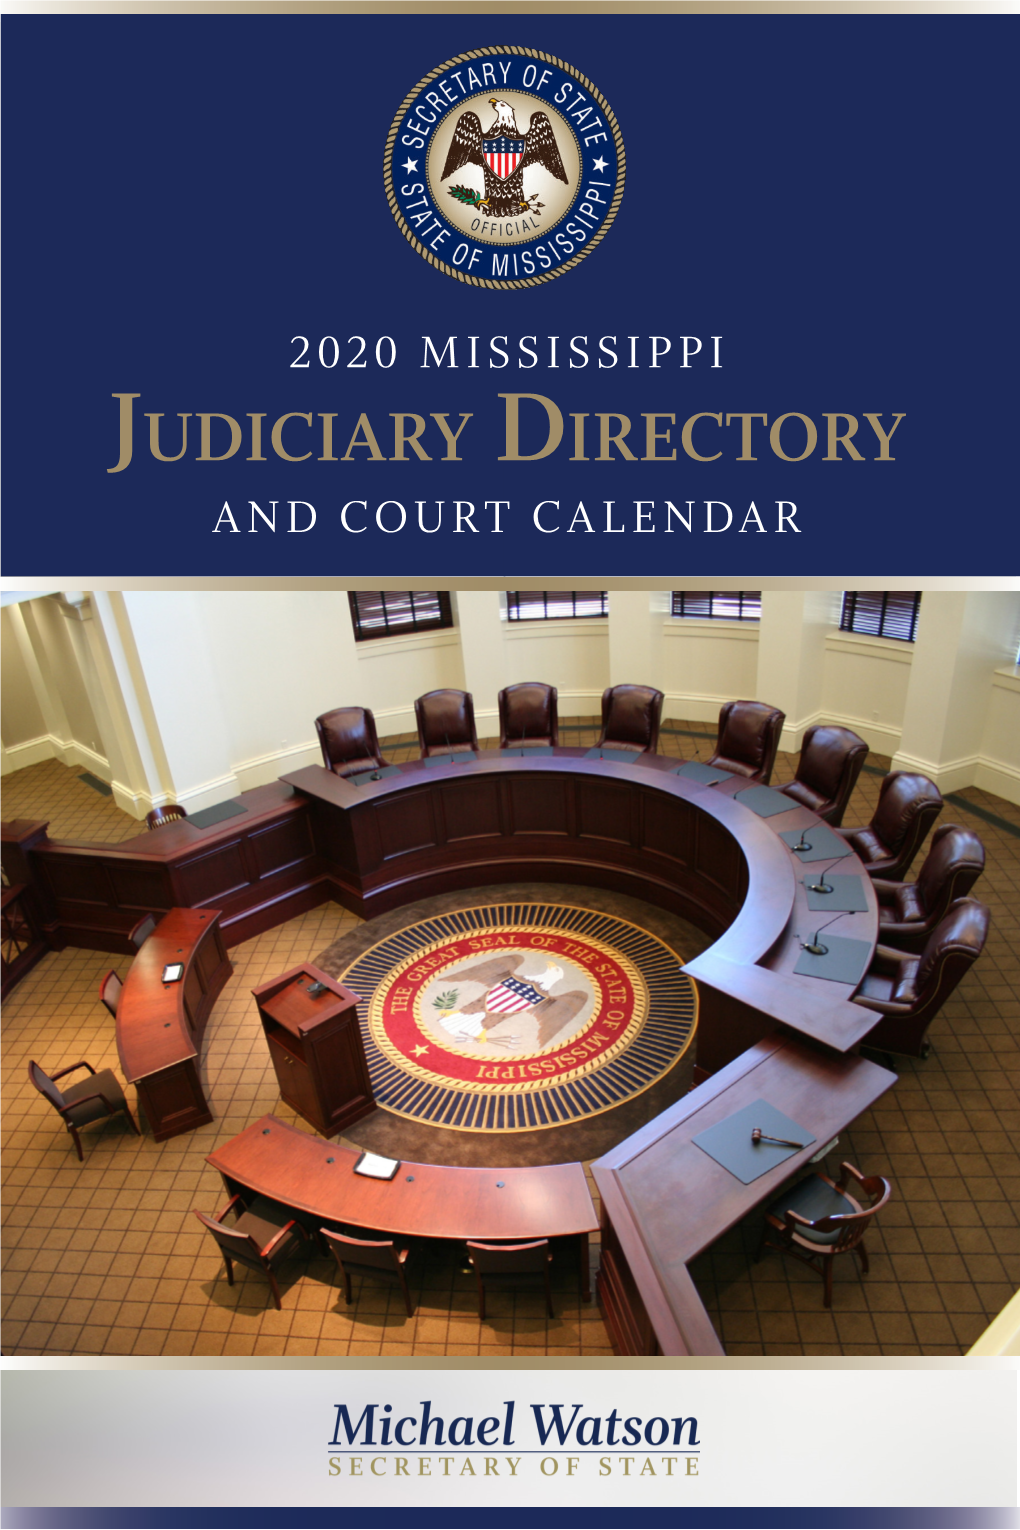 Judiciary Directory and COURT CALENDAR the Secretary of State’S Office Publishes the State of Mississippi Judiciary Directory and Court Calendar Every Year